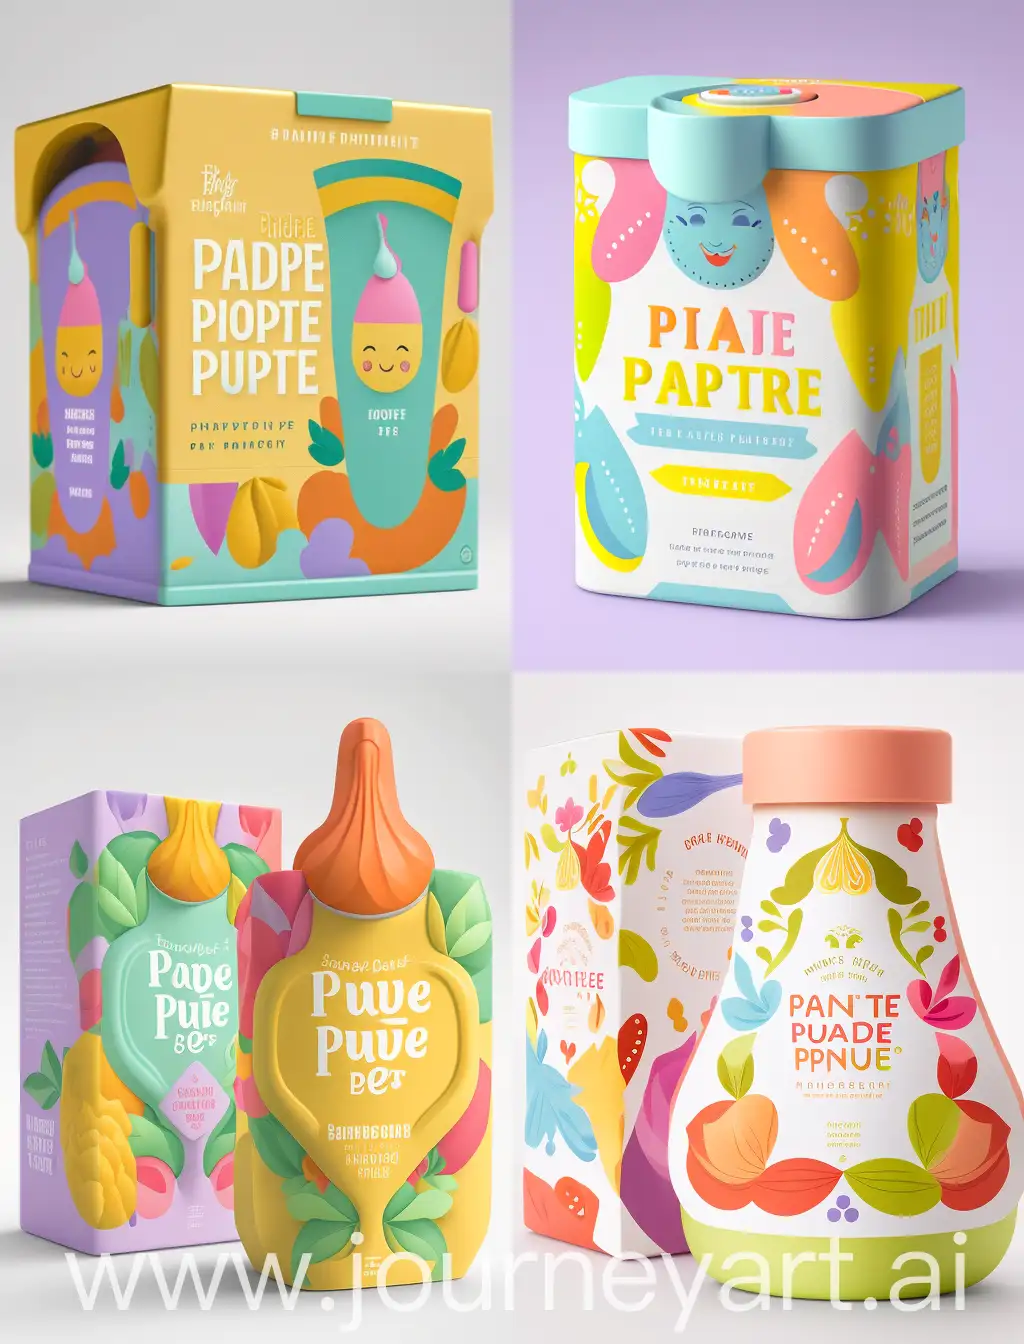 Colorful-and-Playful-Baby-Puree-Packaging-Design